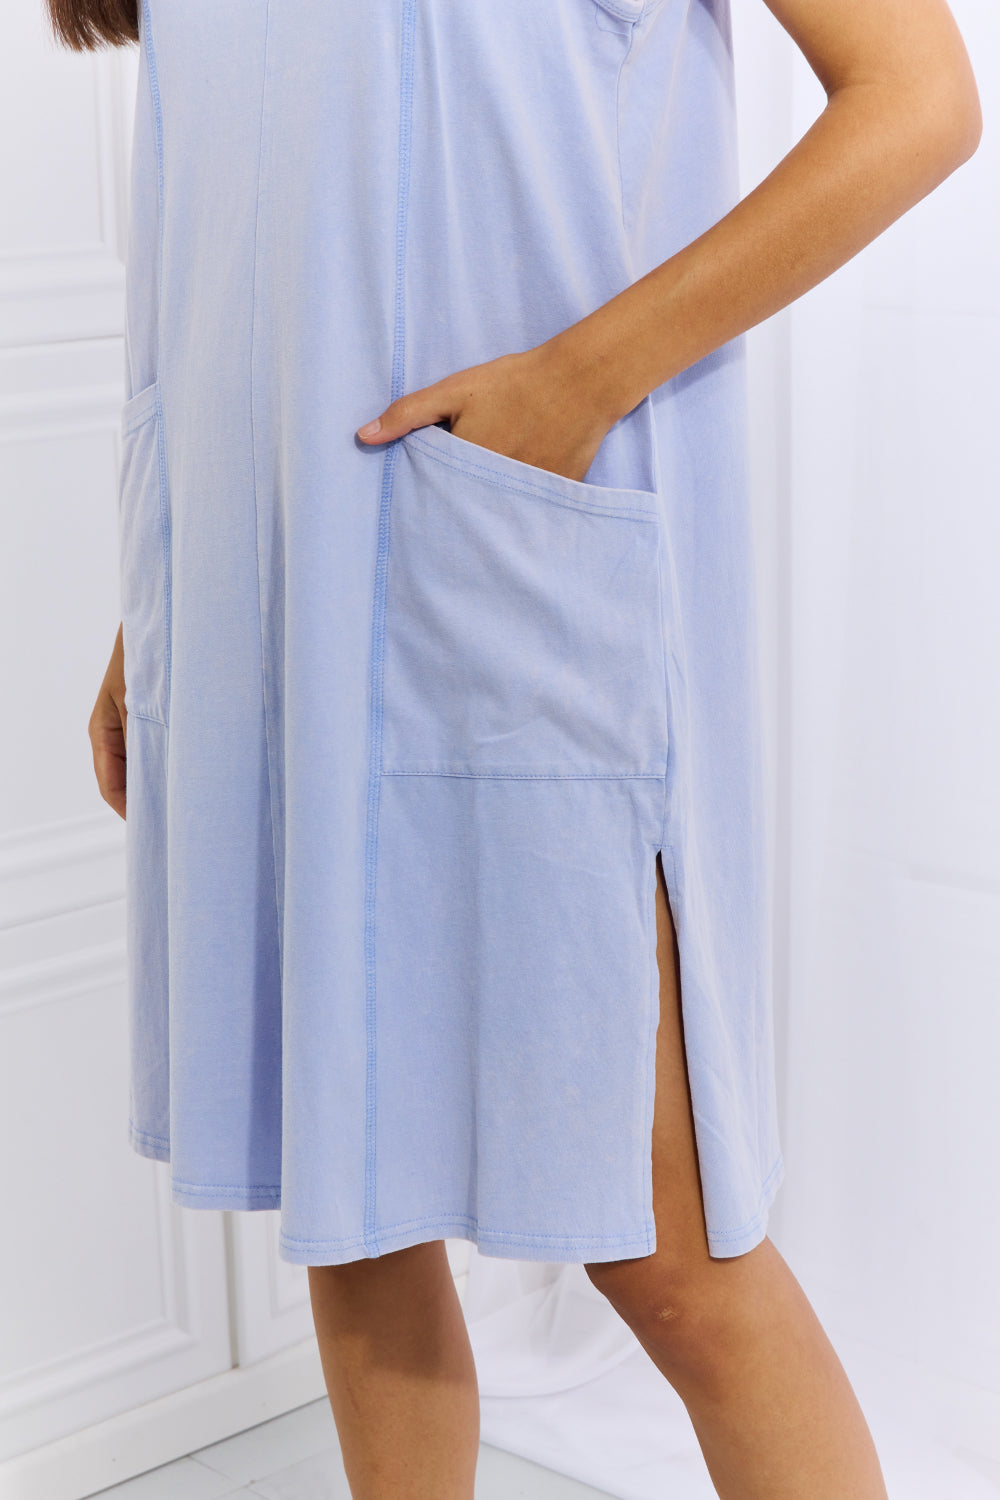 HEYSON Look Good, Feel Good Full Size Washed Sleeveless Casual Dress in Periwinkle Dress